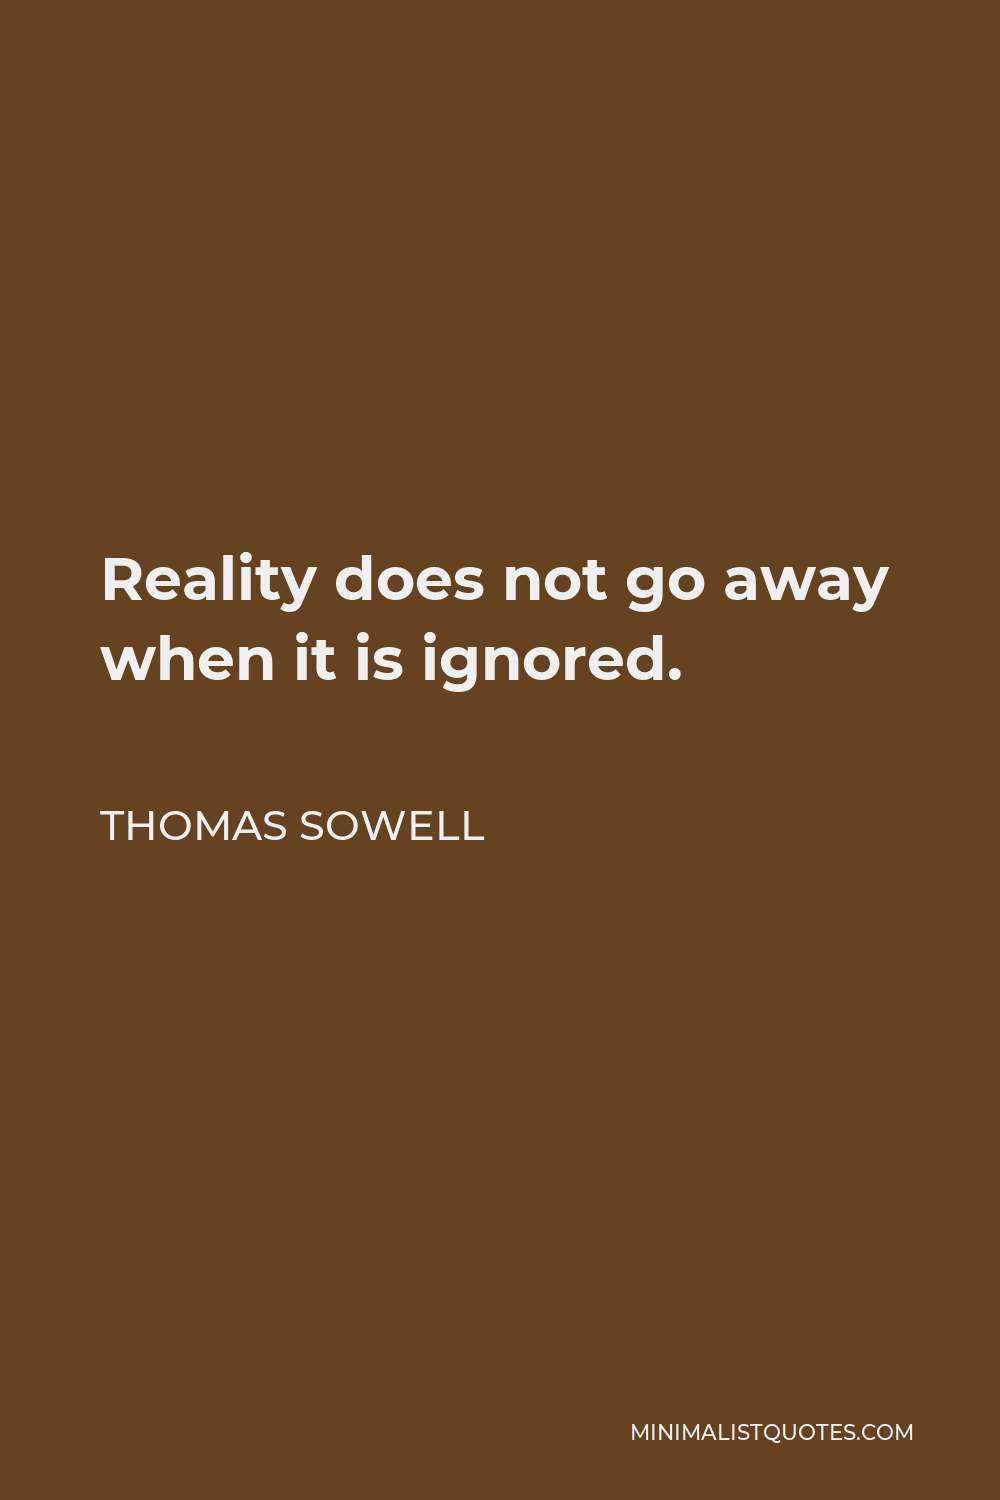 Thomas Sowell Quote - Reality does not go away when it is ignored.